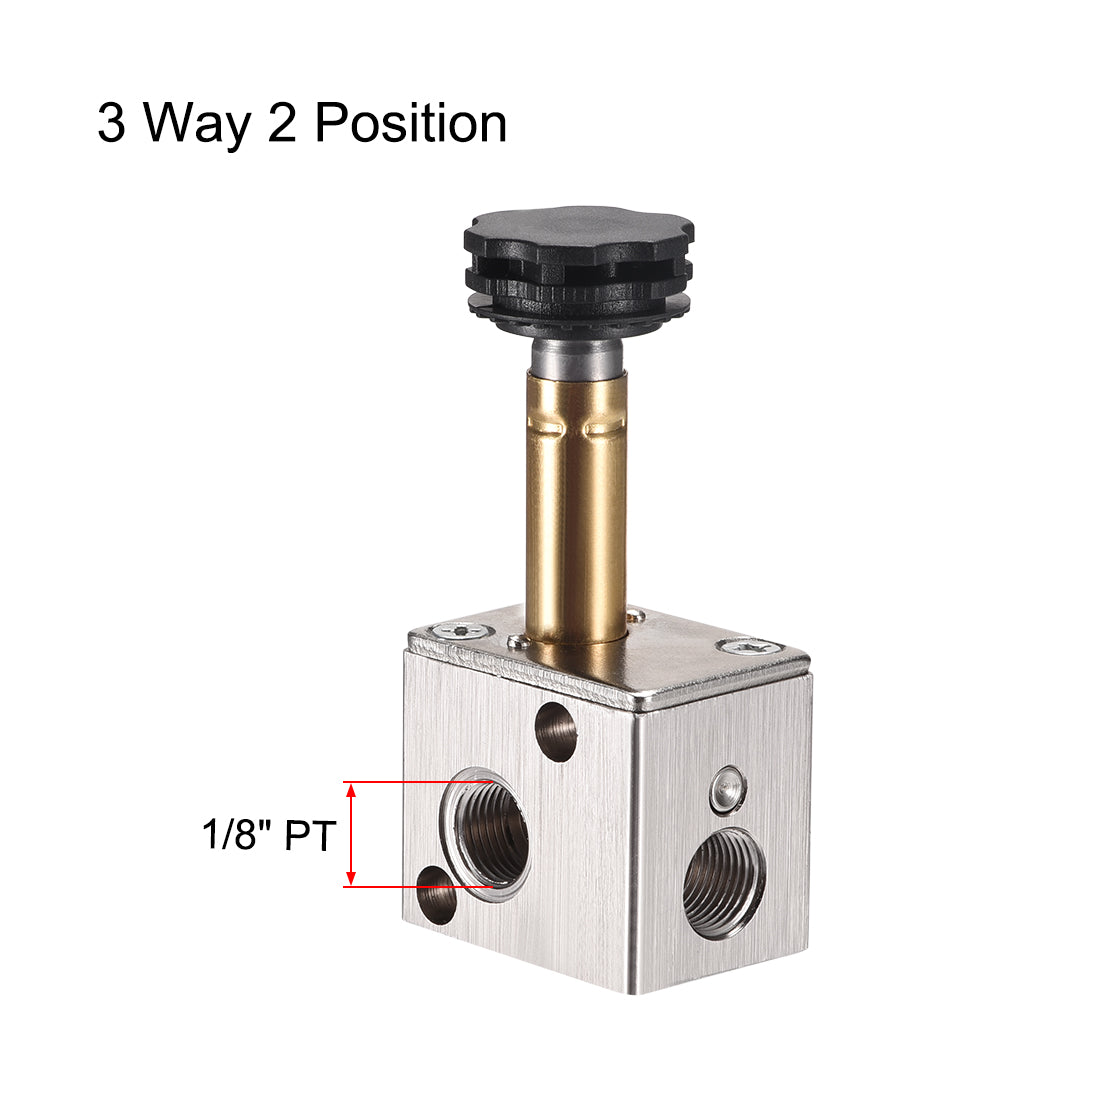 uxcell Uxcell 3V1-06  Pneumatic Air NC Single Electrical Control Solenoid Valve 3 Way 2 Position 1/8" PT Internally Piloted Acting Type Red Light